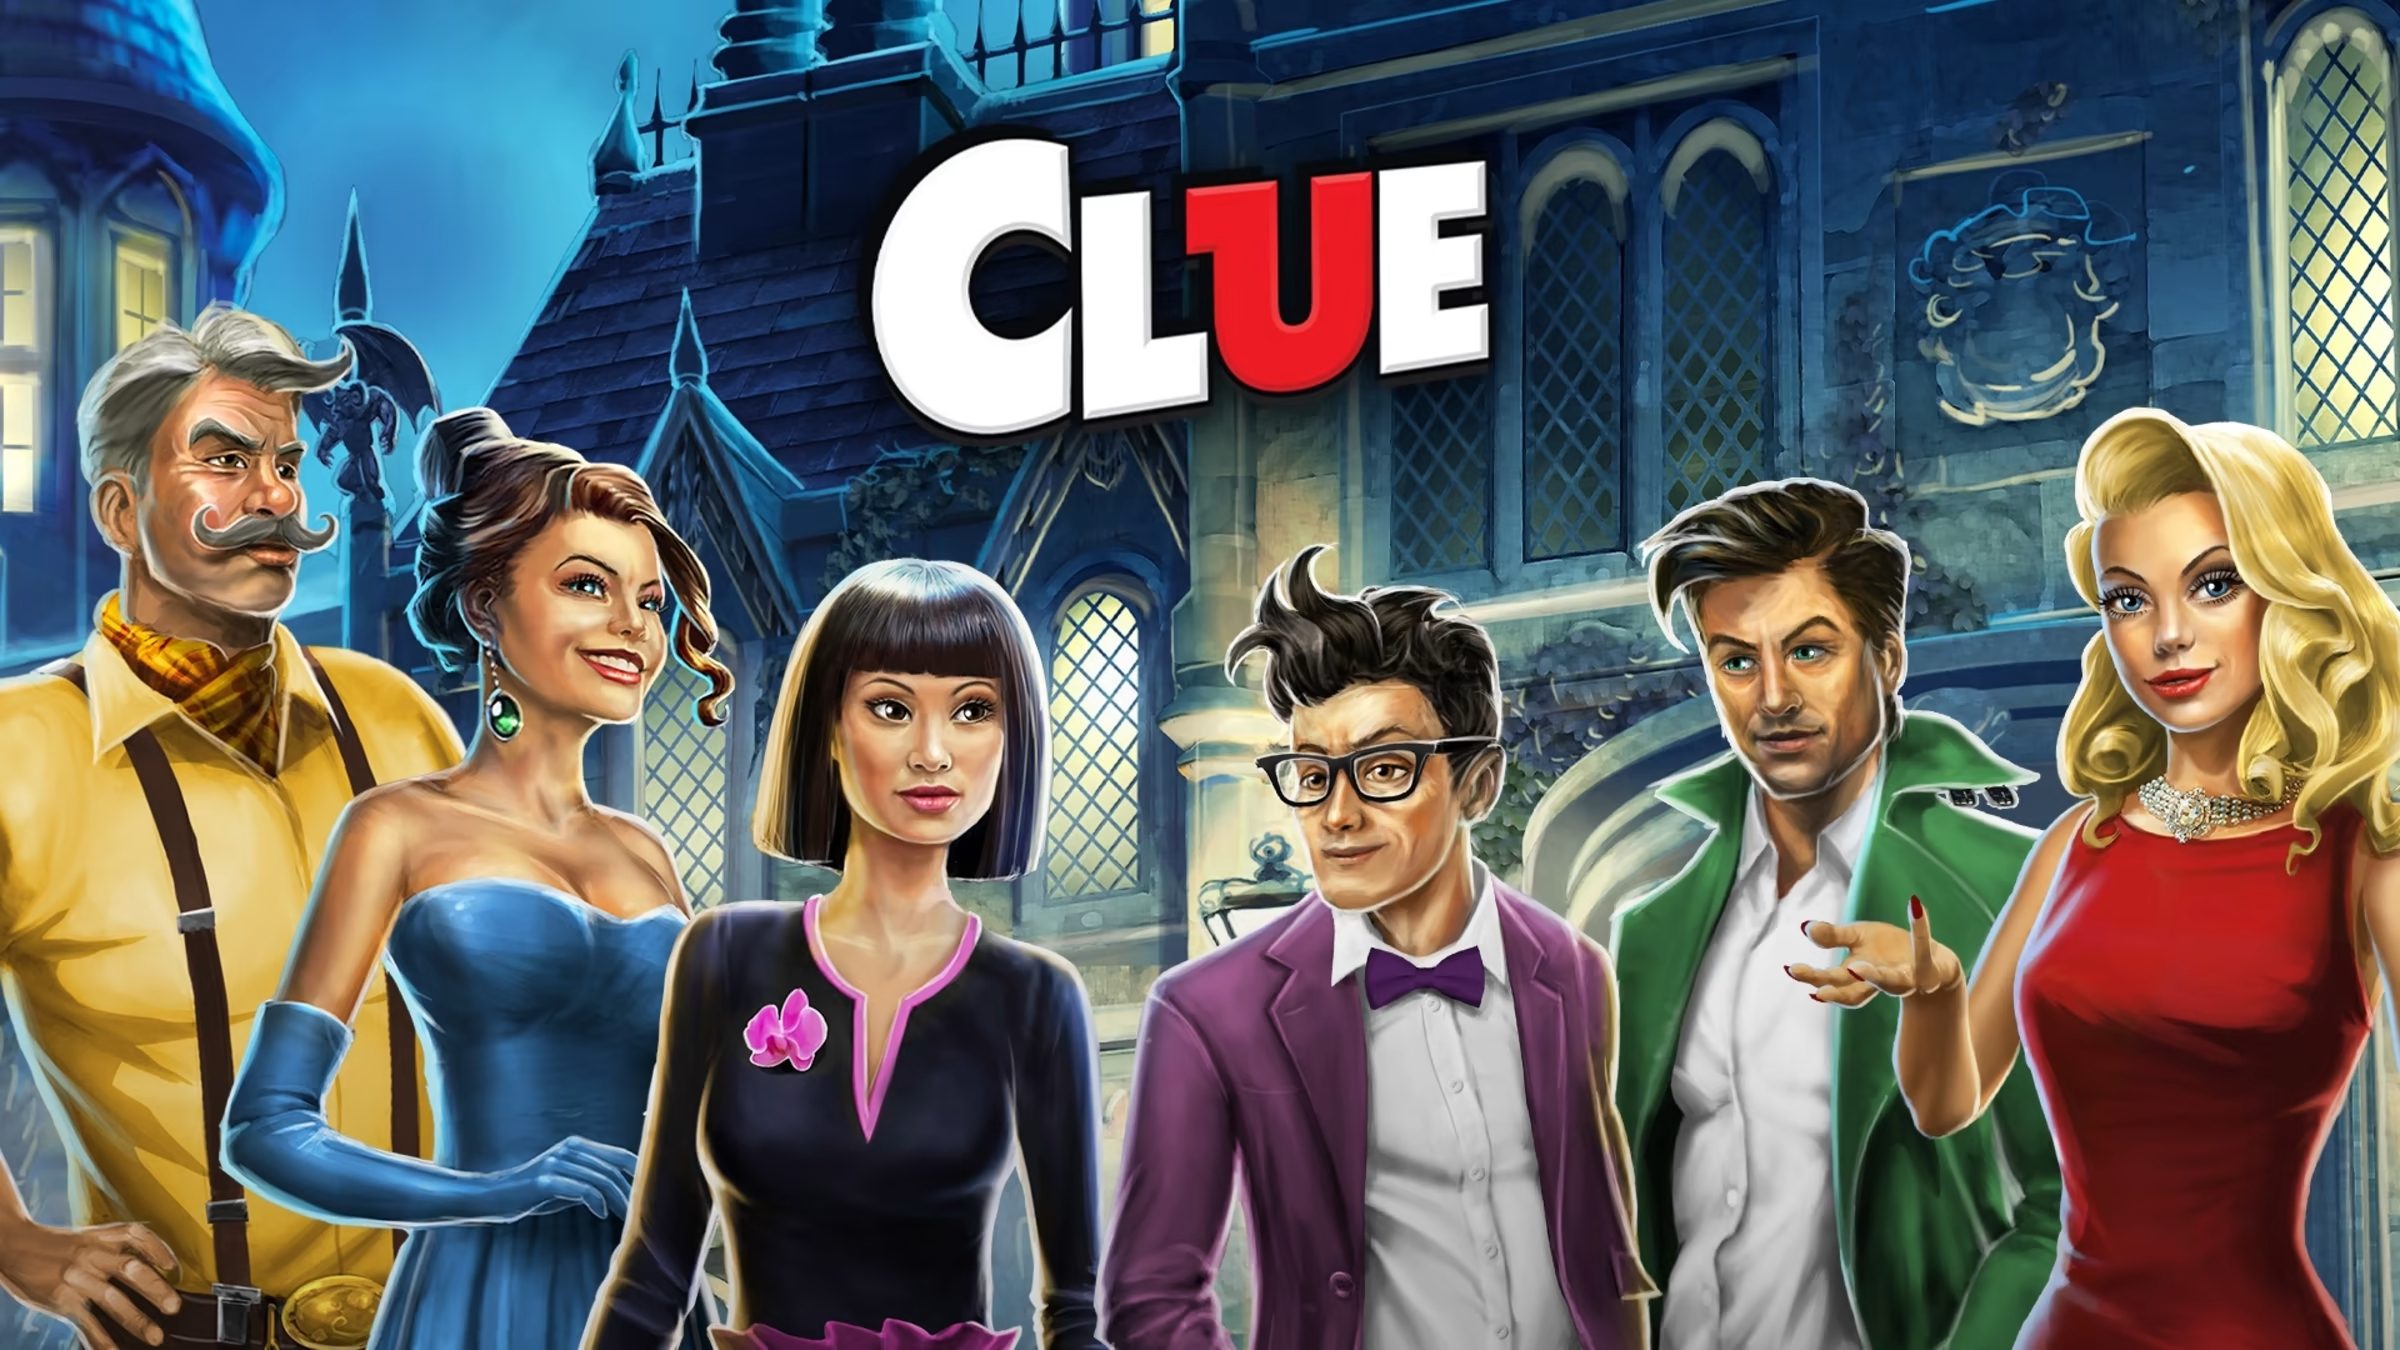 Sony Announces New ‘Clue’ Films And Series In Development